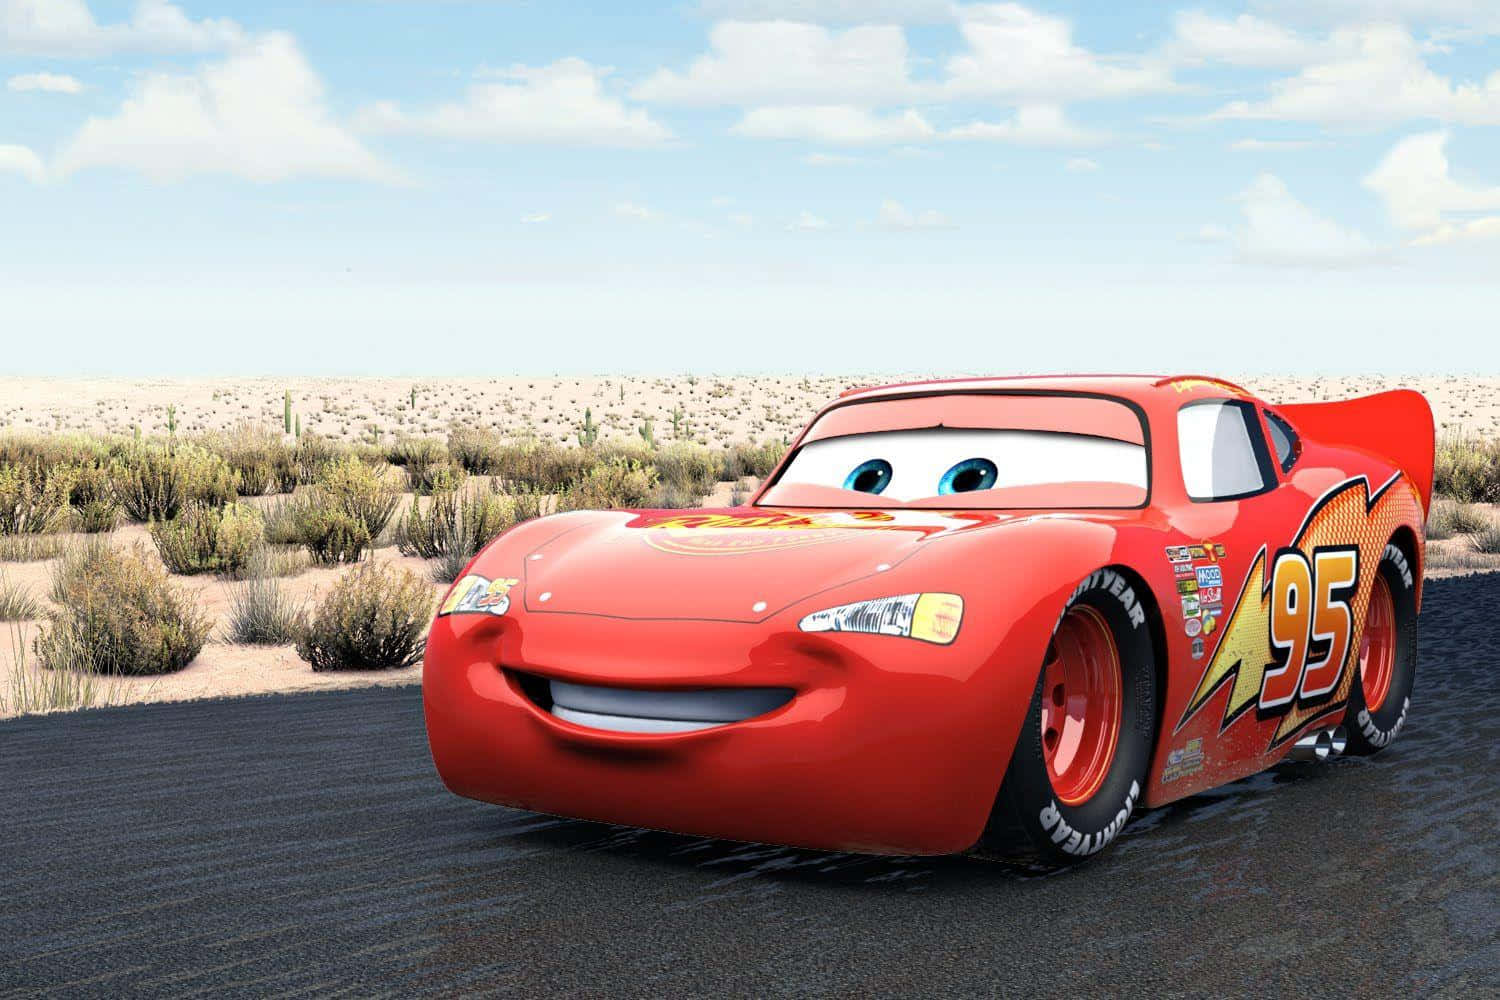 Get ready to race with Lightning McQueen